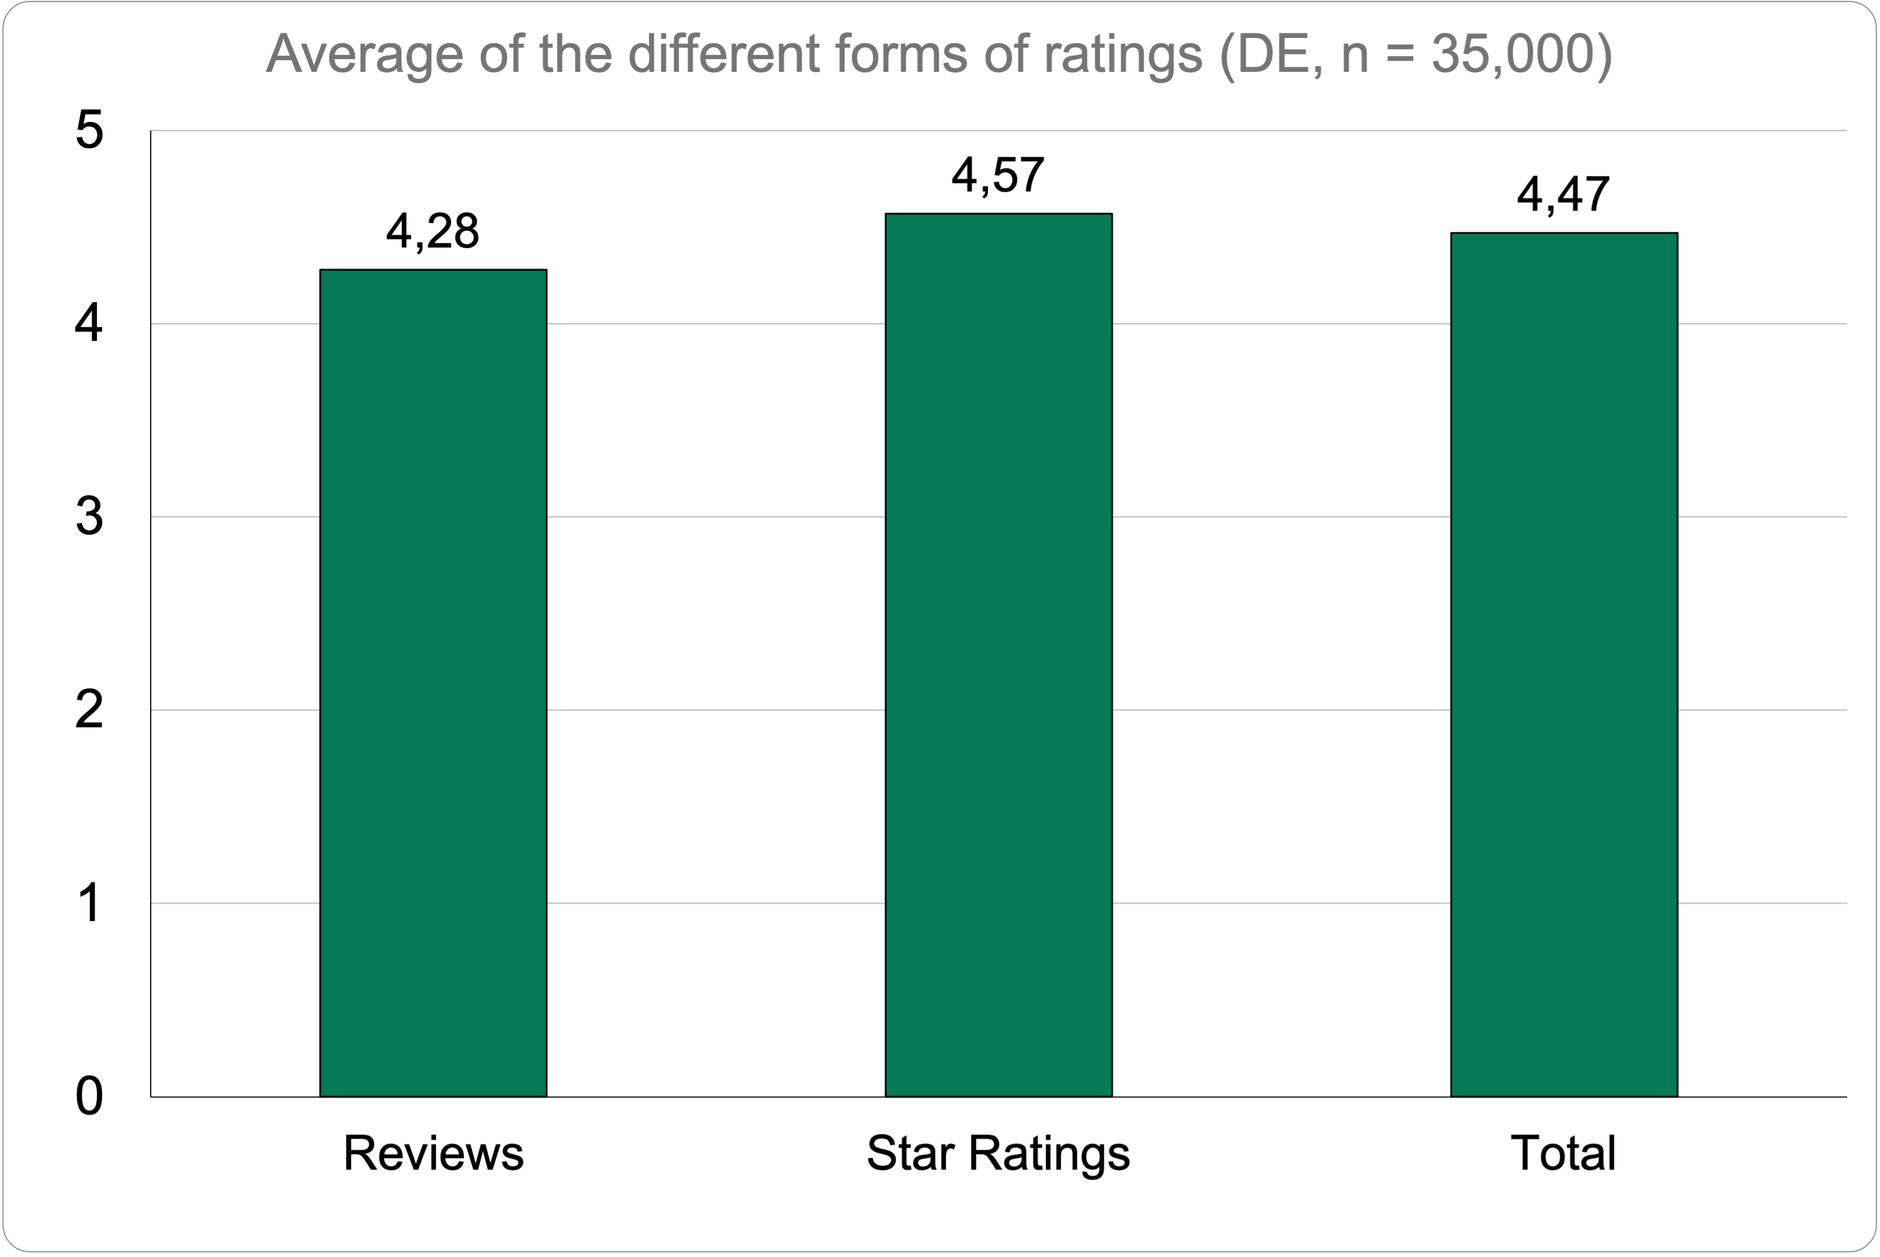 Average rating of star ratings and reviews